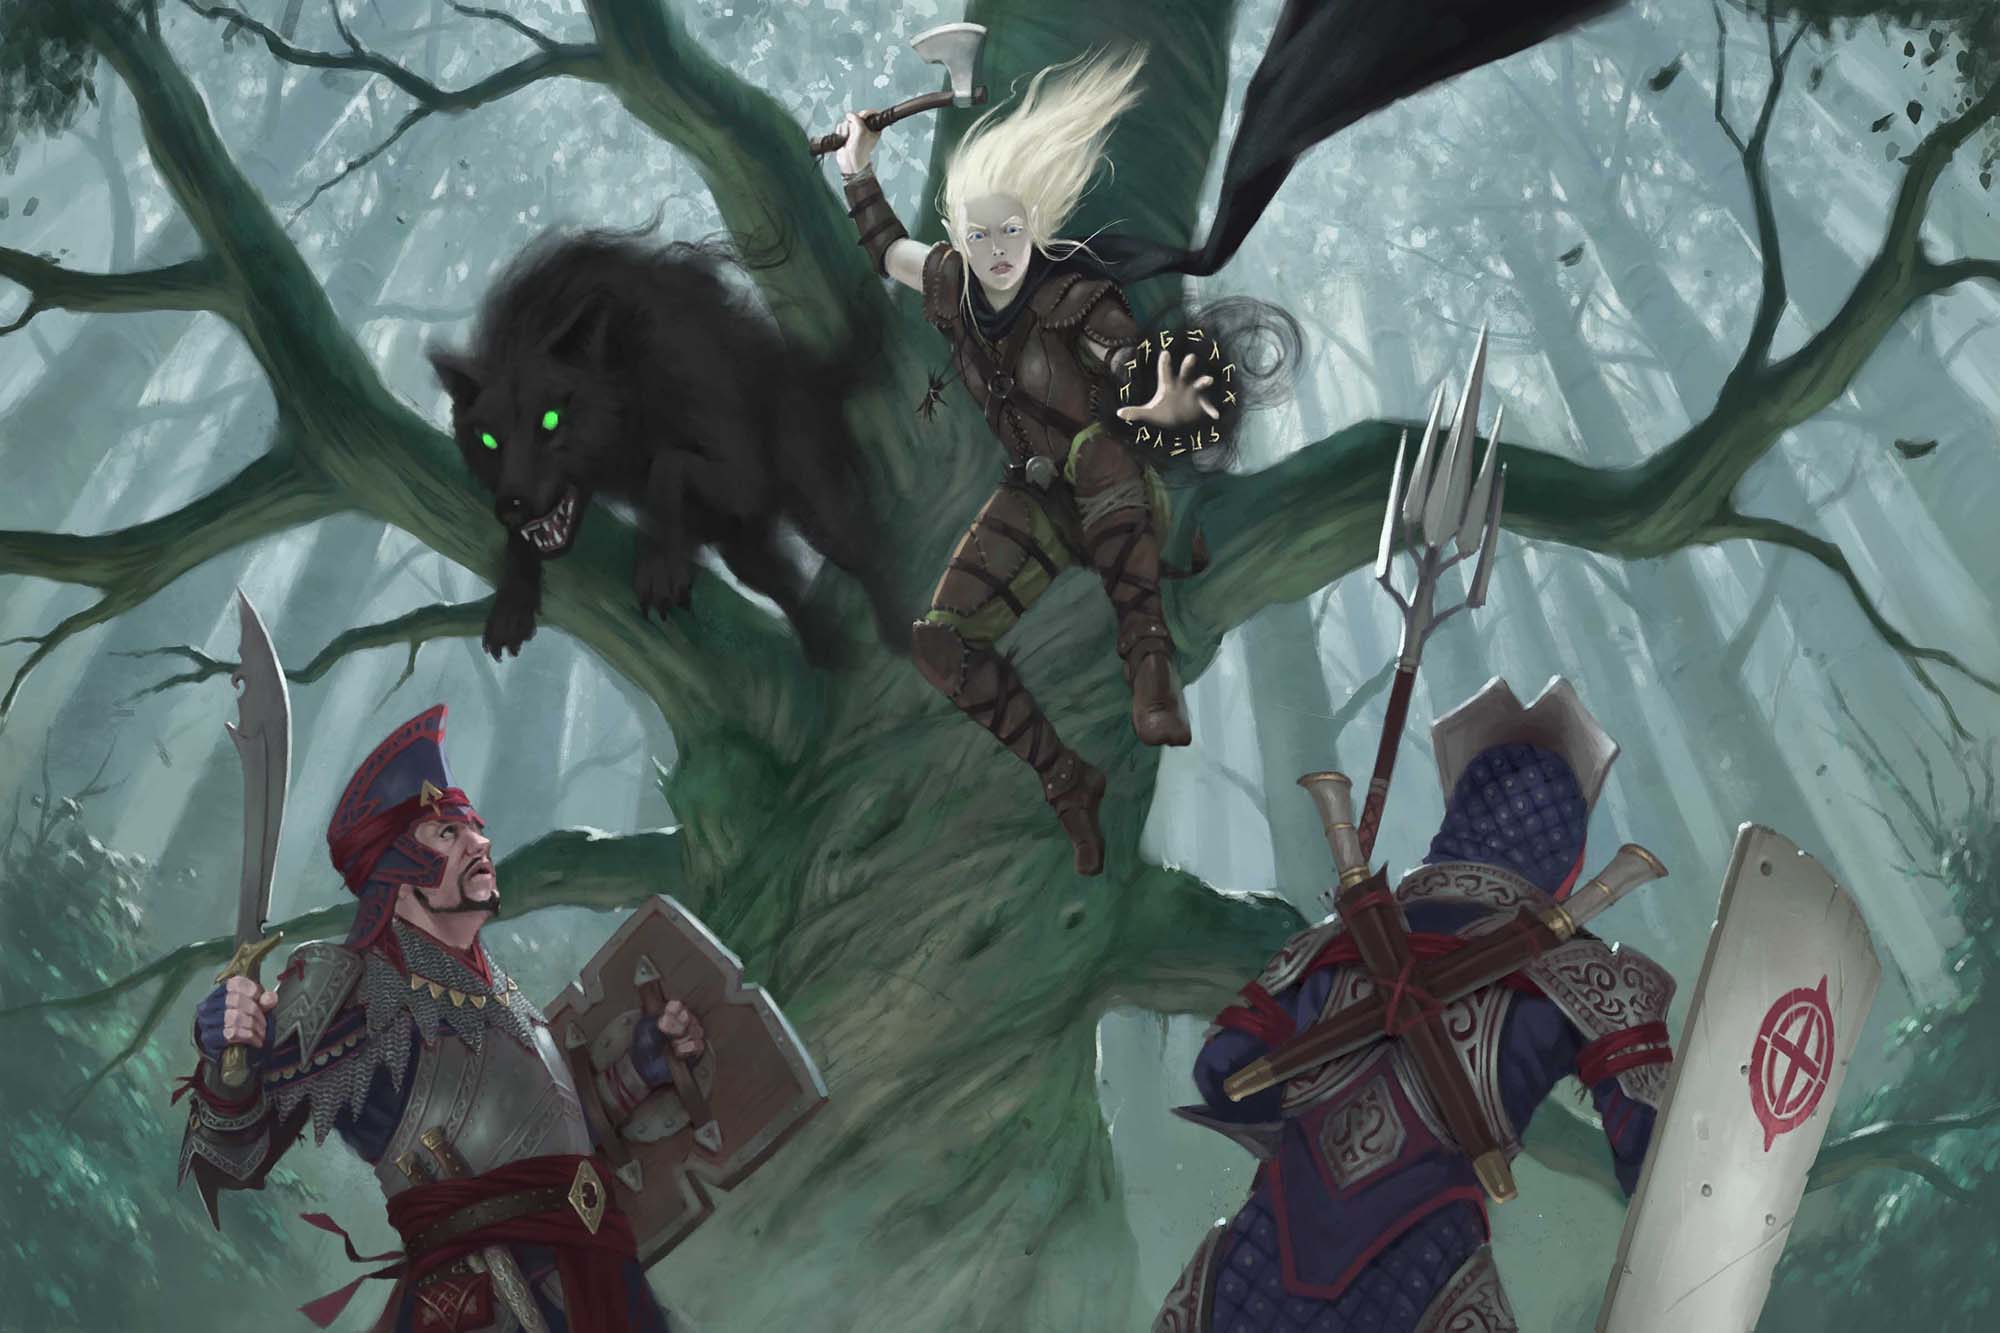 An albino elf and a wolf made of shadows leap out of a tree at a pair of unsuspecting soldiers